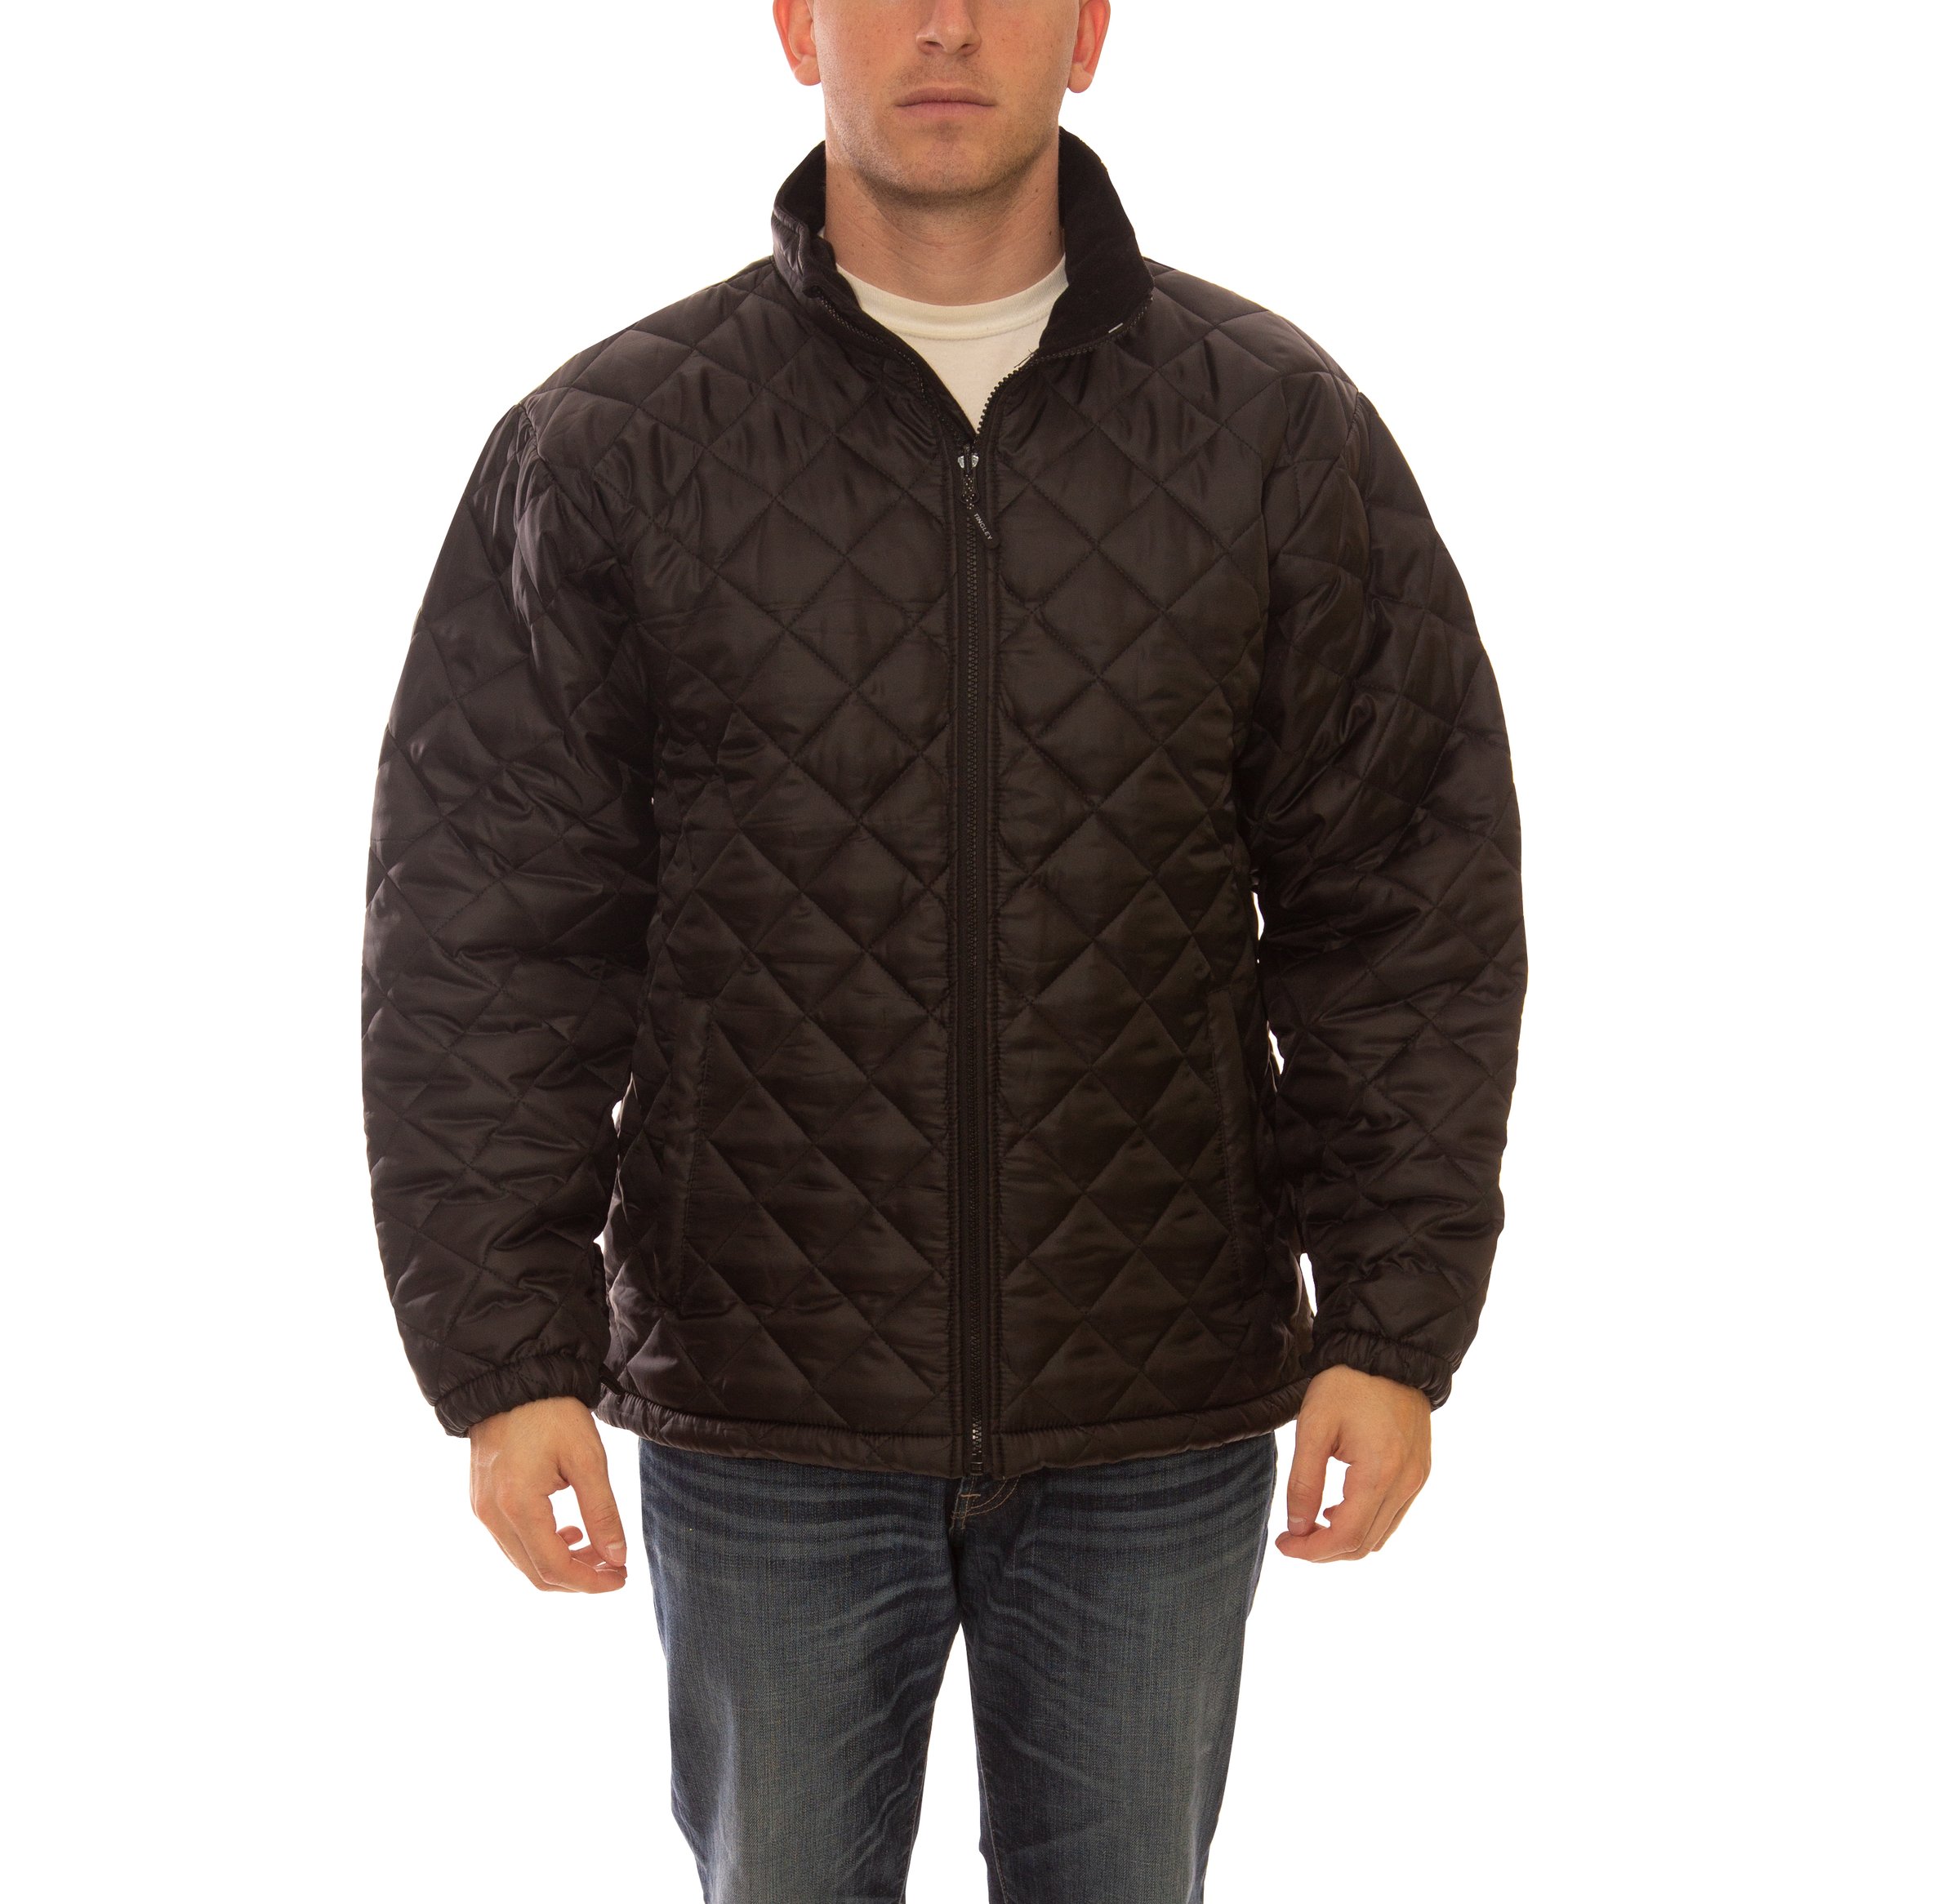 JACKET BLACK QUILTED XLARGE W/ZIPPER & 2 POCKETS